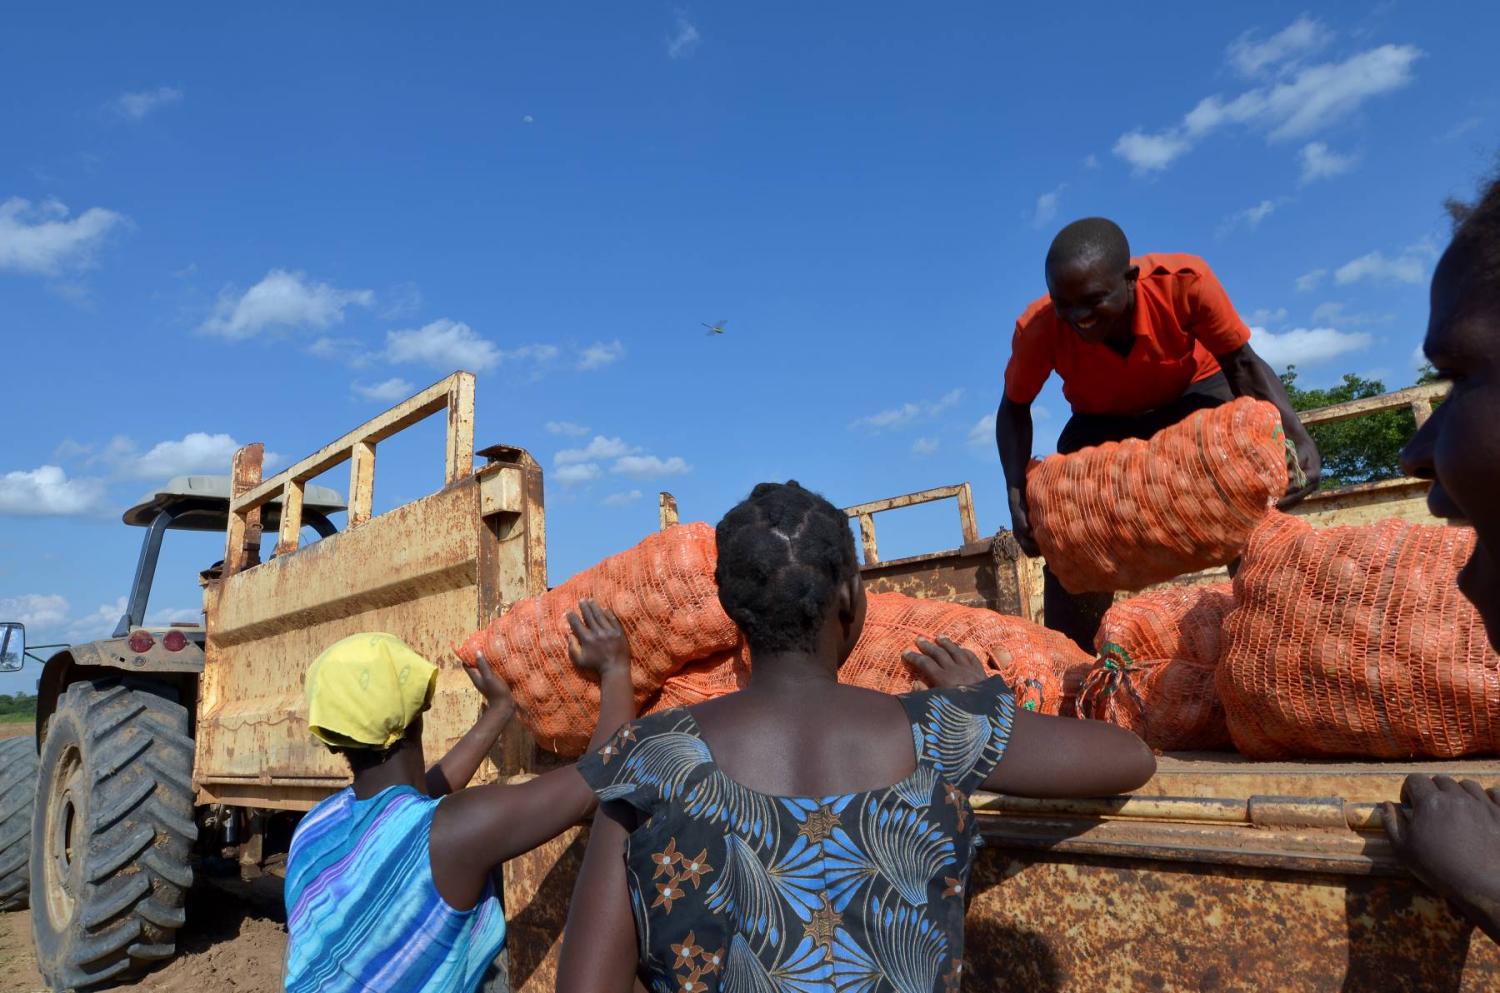 Farmers in Lusaka, Zambia, load a truck with potatoes for export. (Photo credit: africa924 / Shutterstock)